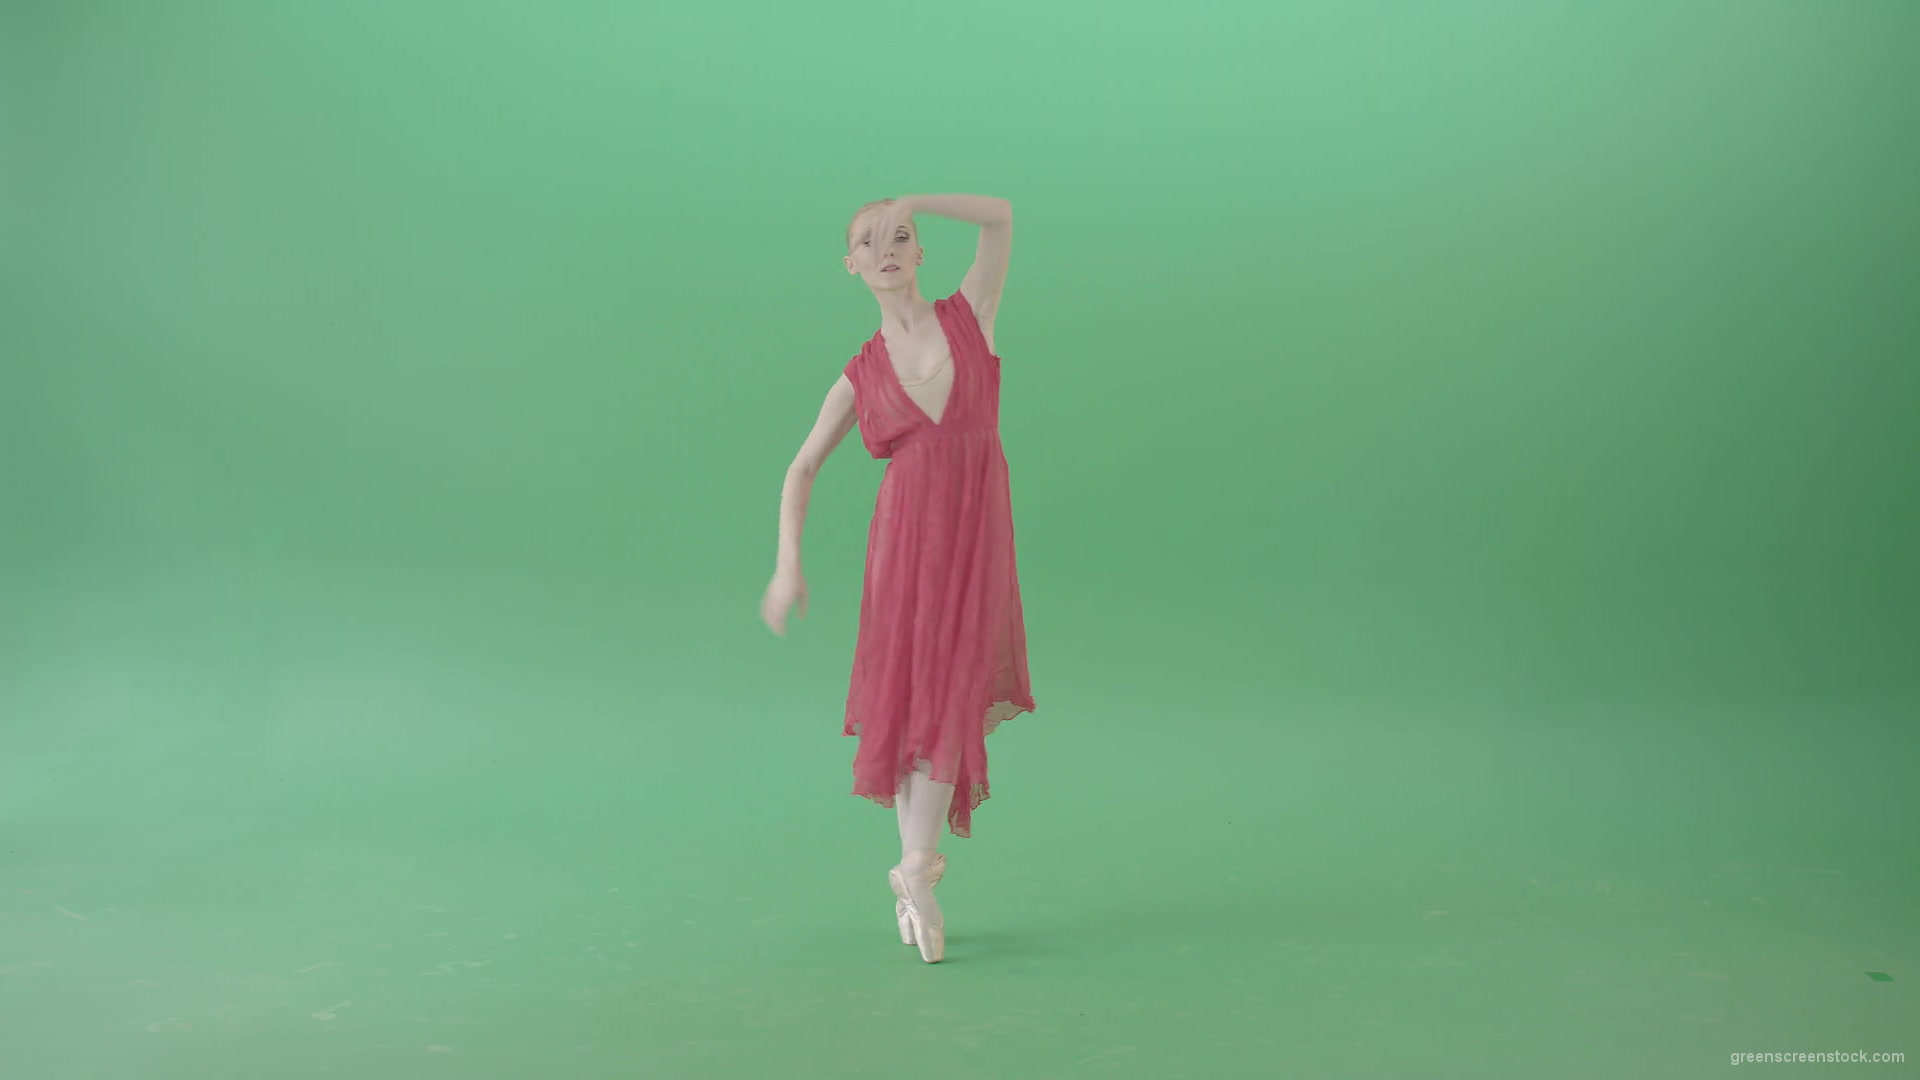 Blonde-girl-in-red-dress-dancing-classical-ballet-on-green-screen-4K-video-footage-1920_007 Green Screen Stock